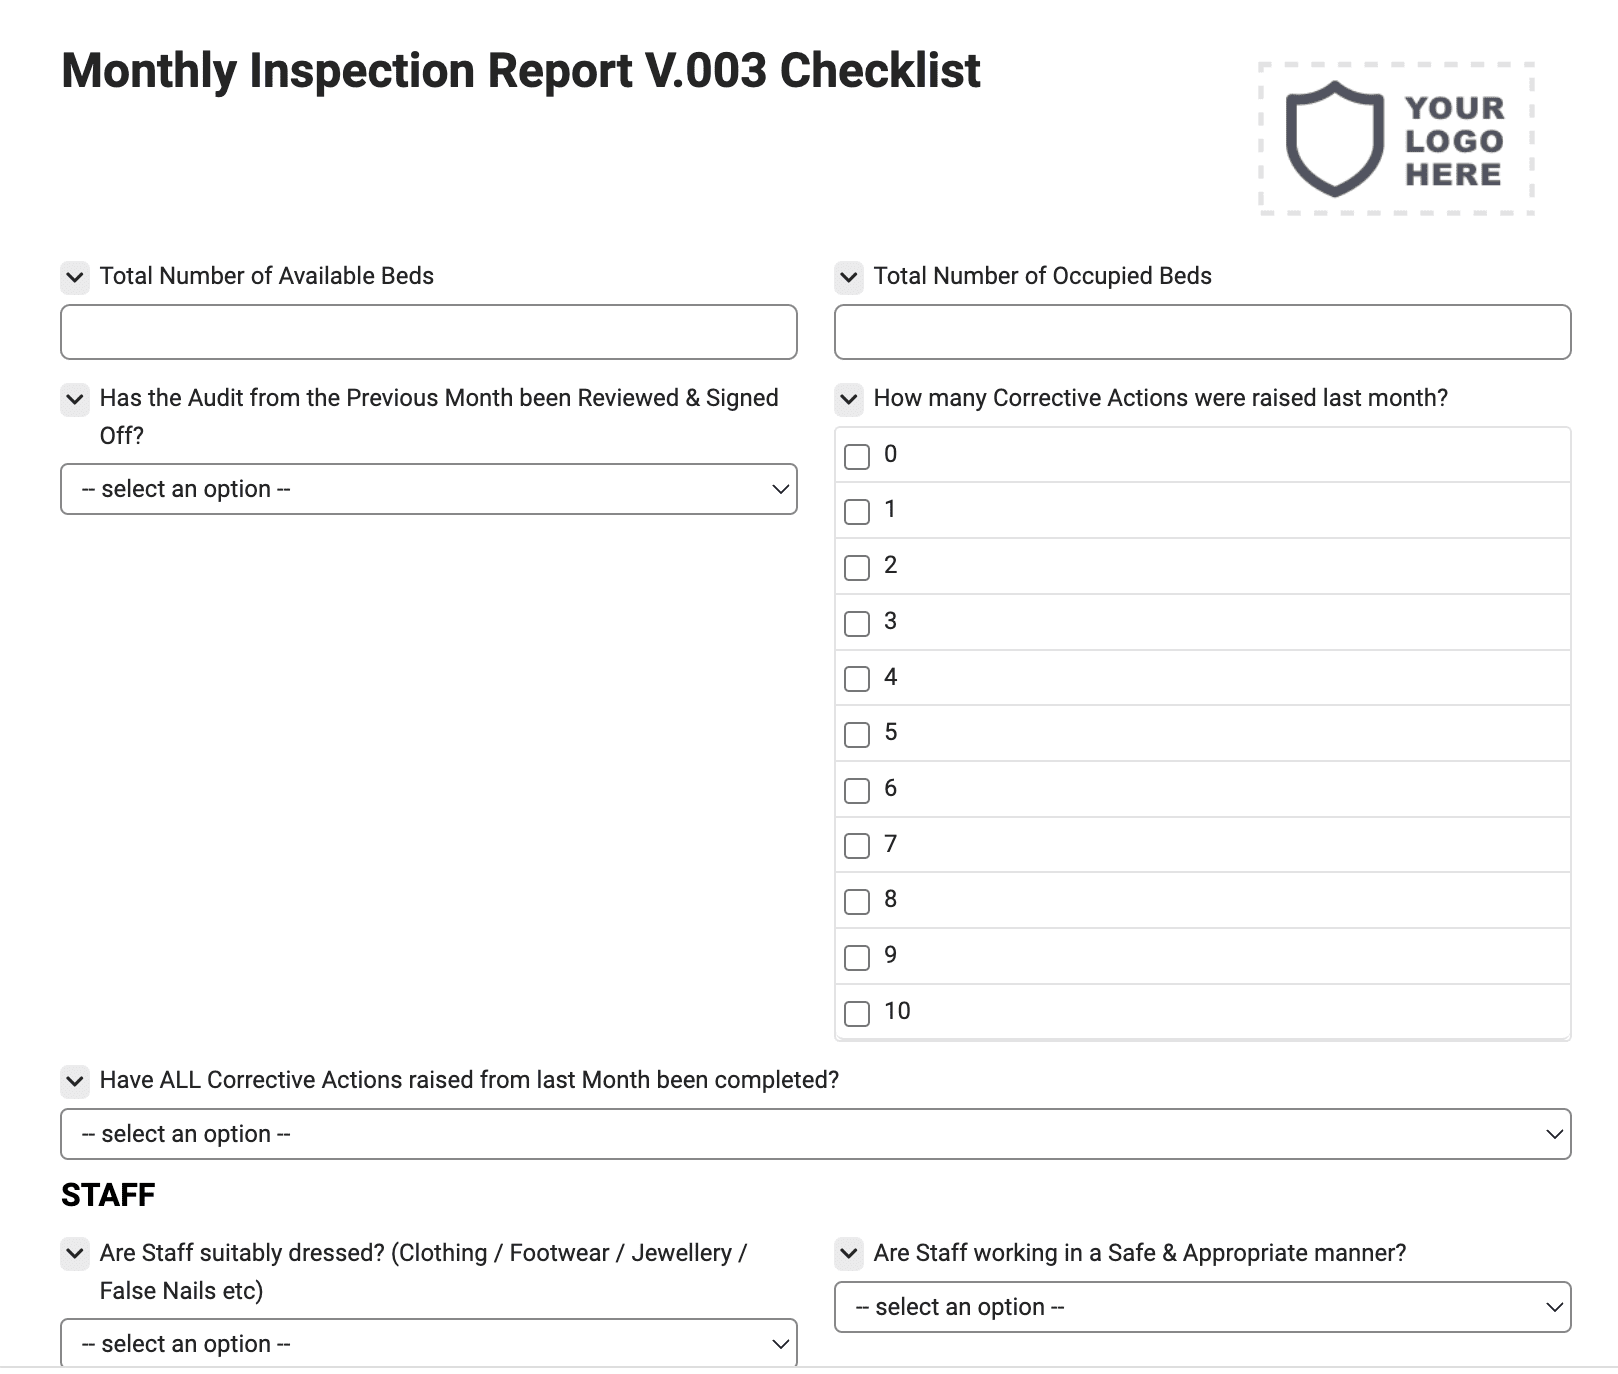 Monthly Inspection Report V.003 Checklist